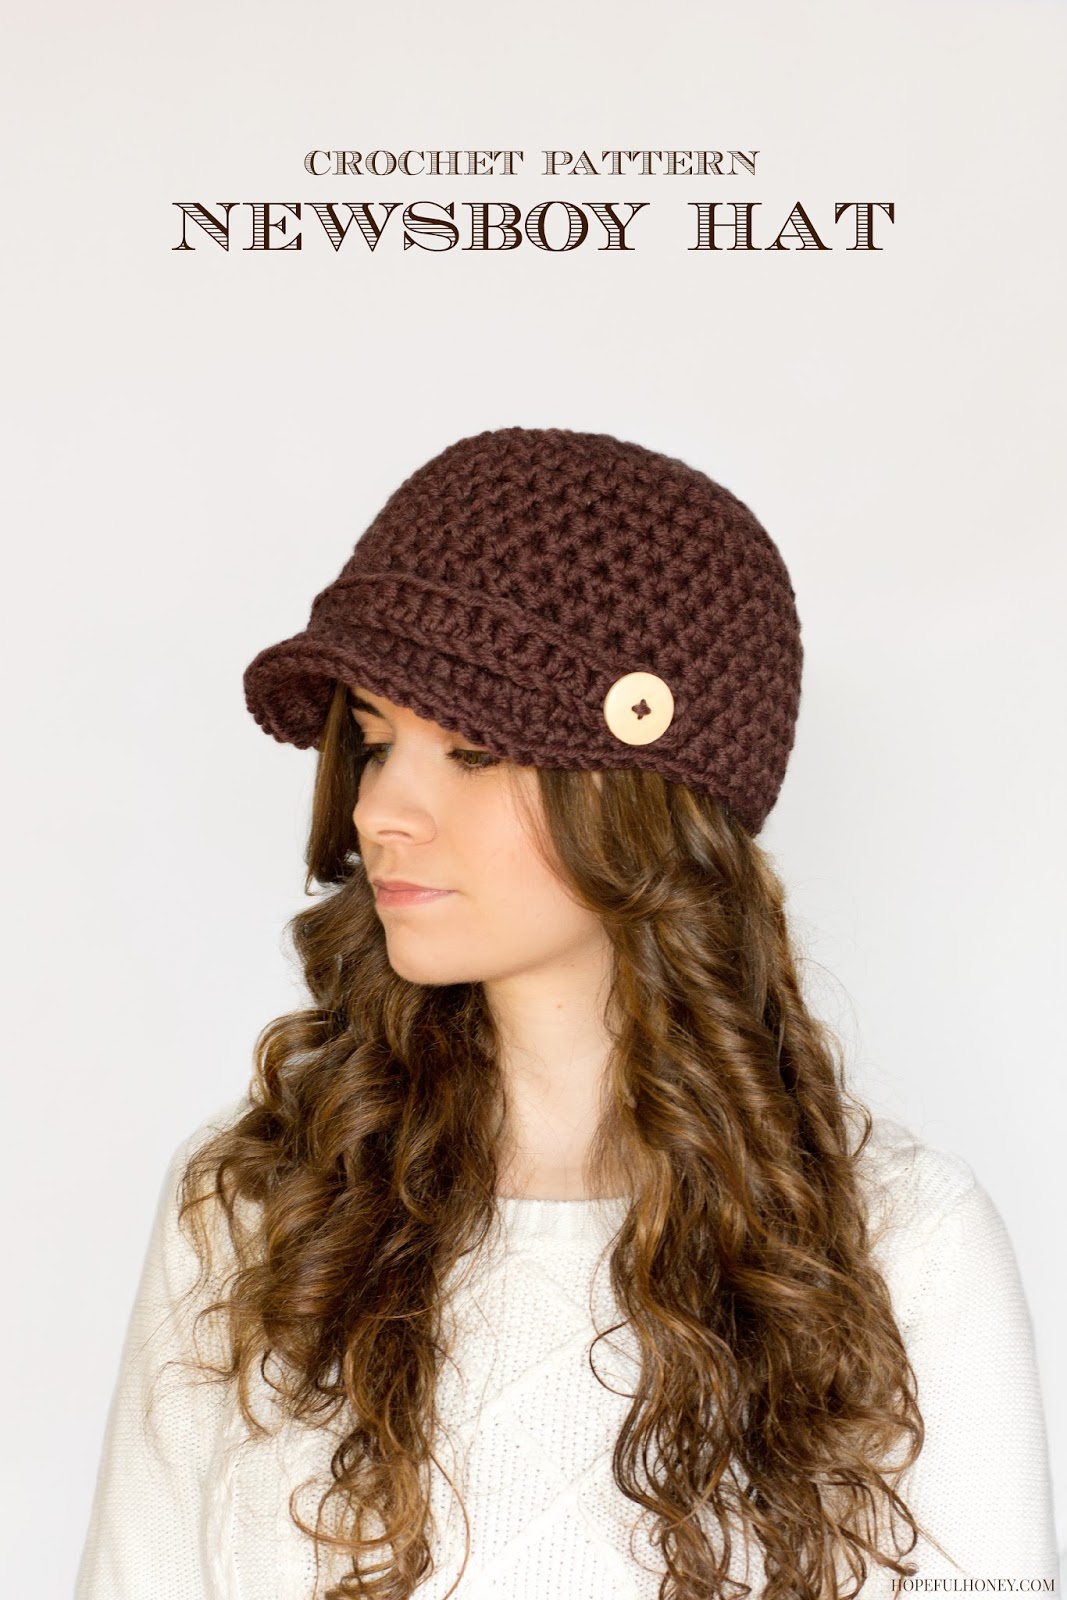 Best Free Crochet Patterns For Newsboy Hats Images In Crochet | My XXX ...